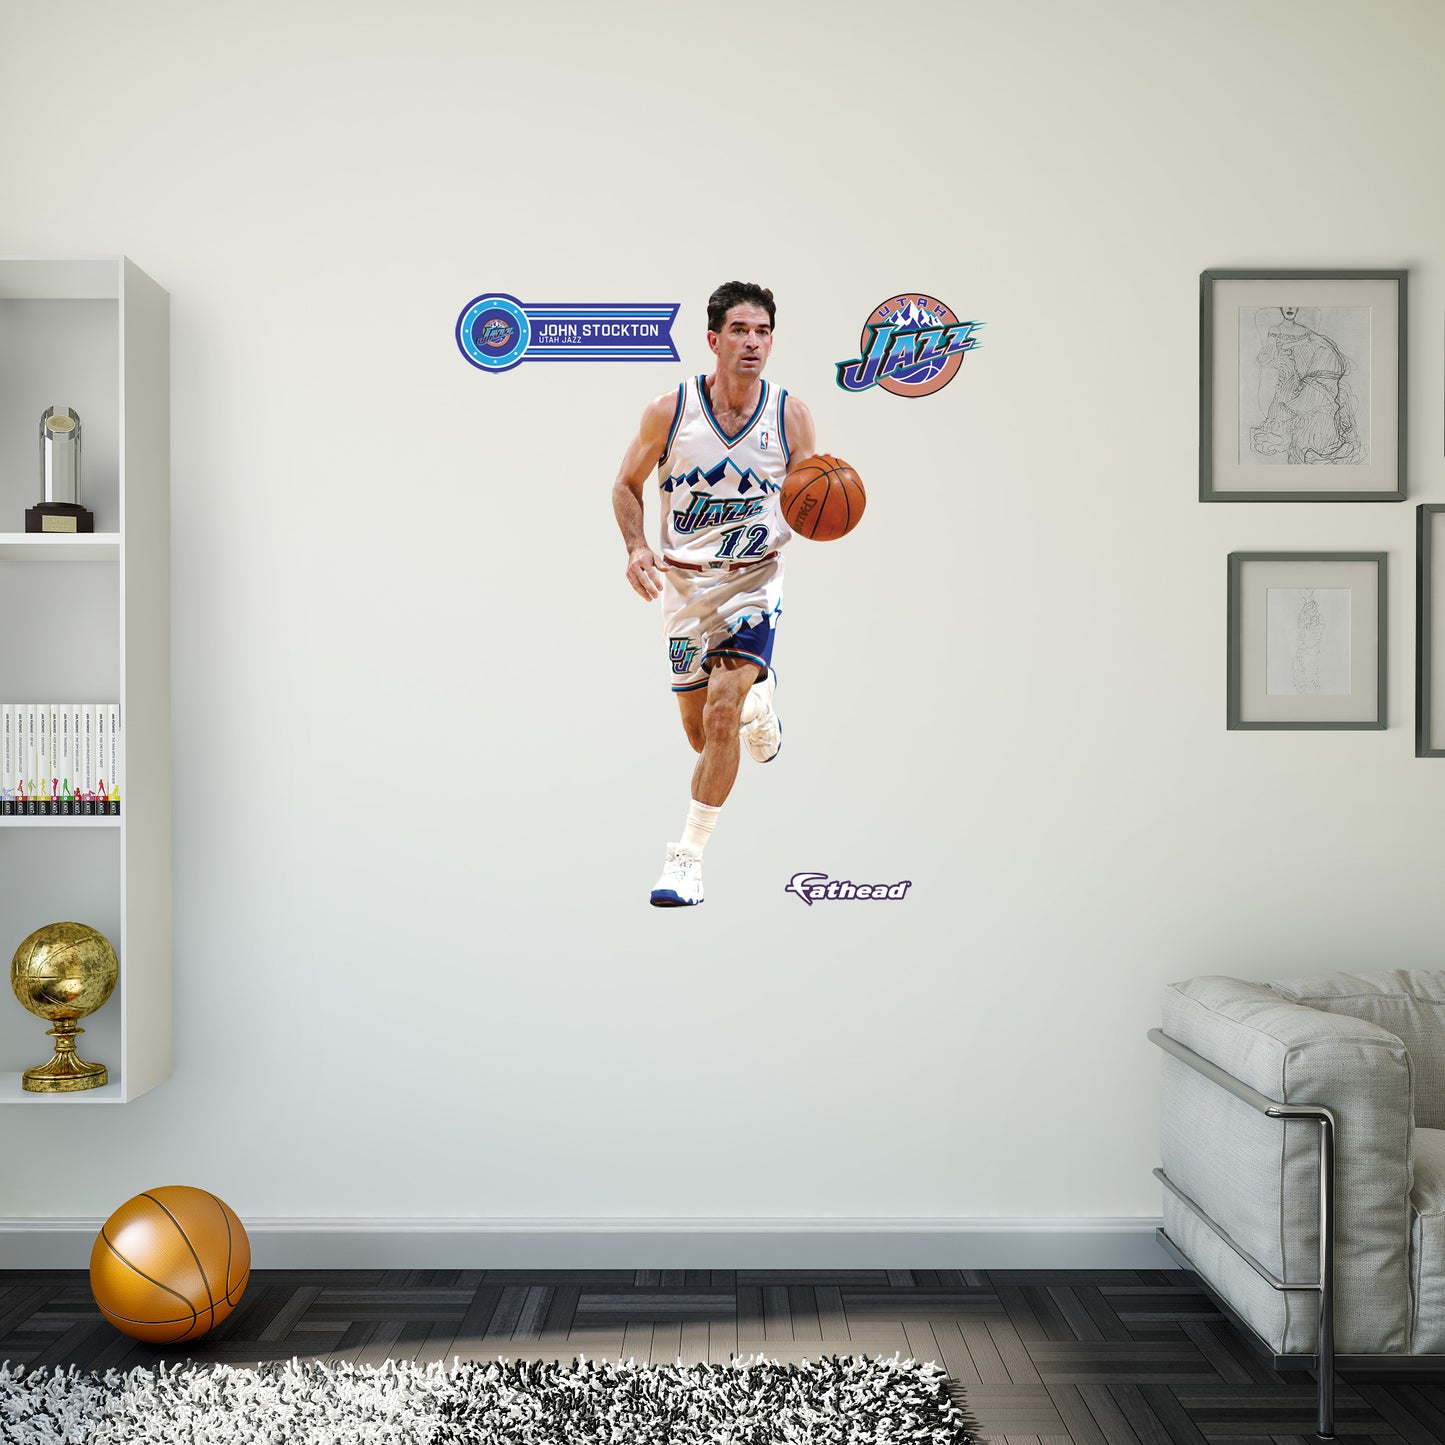 Utah Jazz: John Stockton Legend        - Officially Licensed NBA Removable     Adhesive Decal